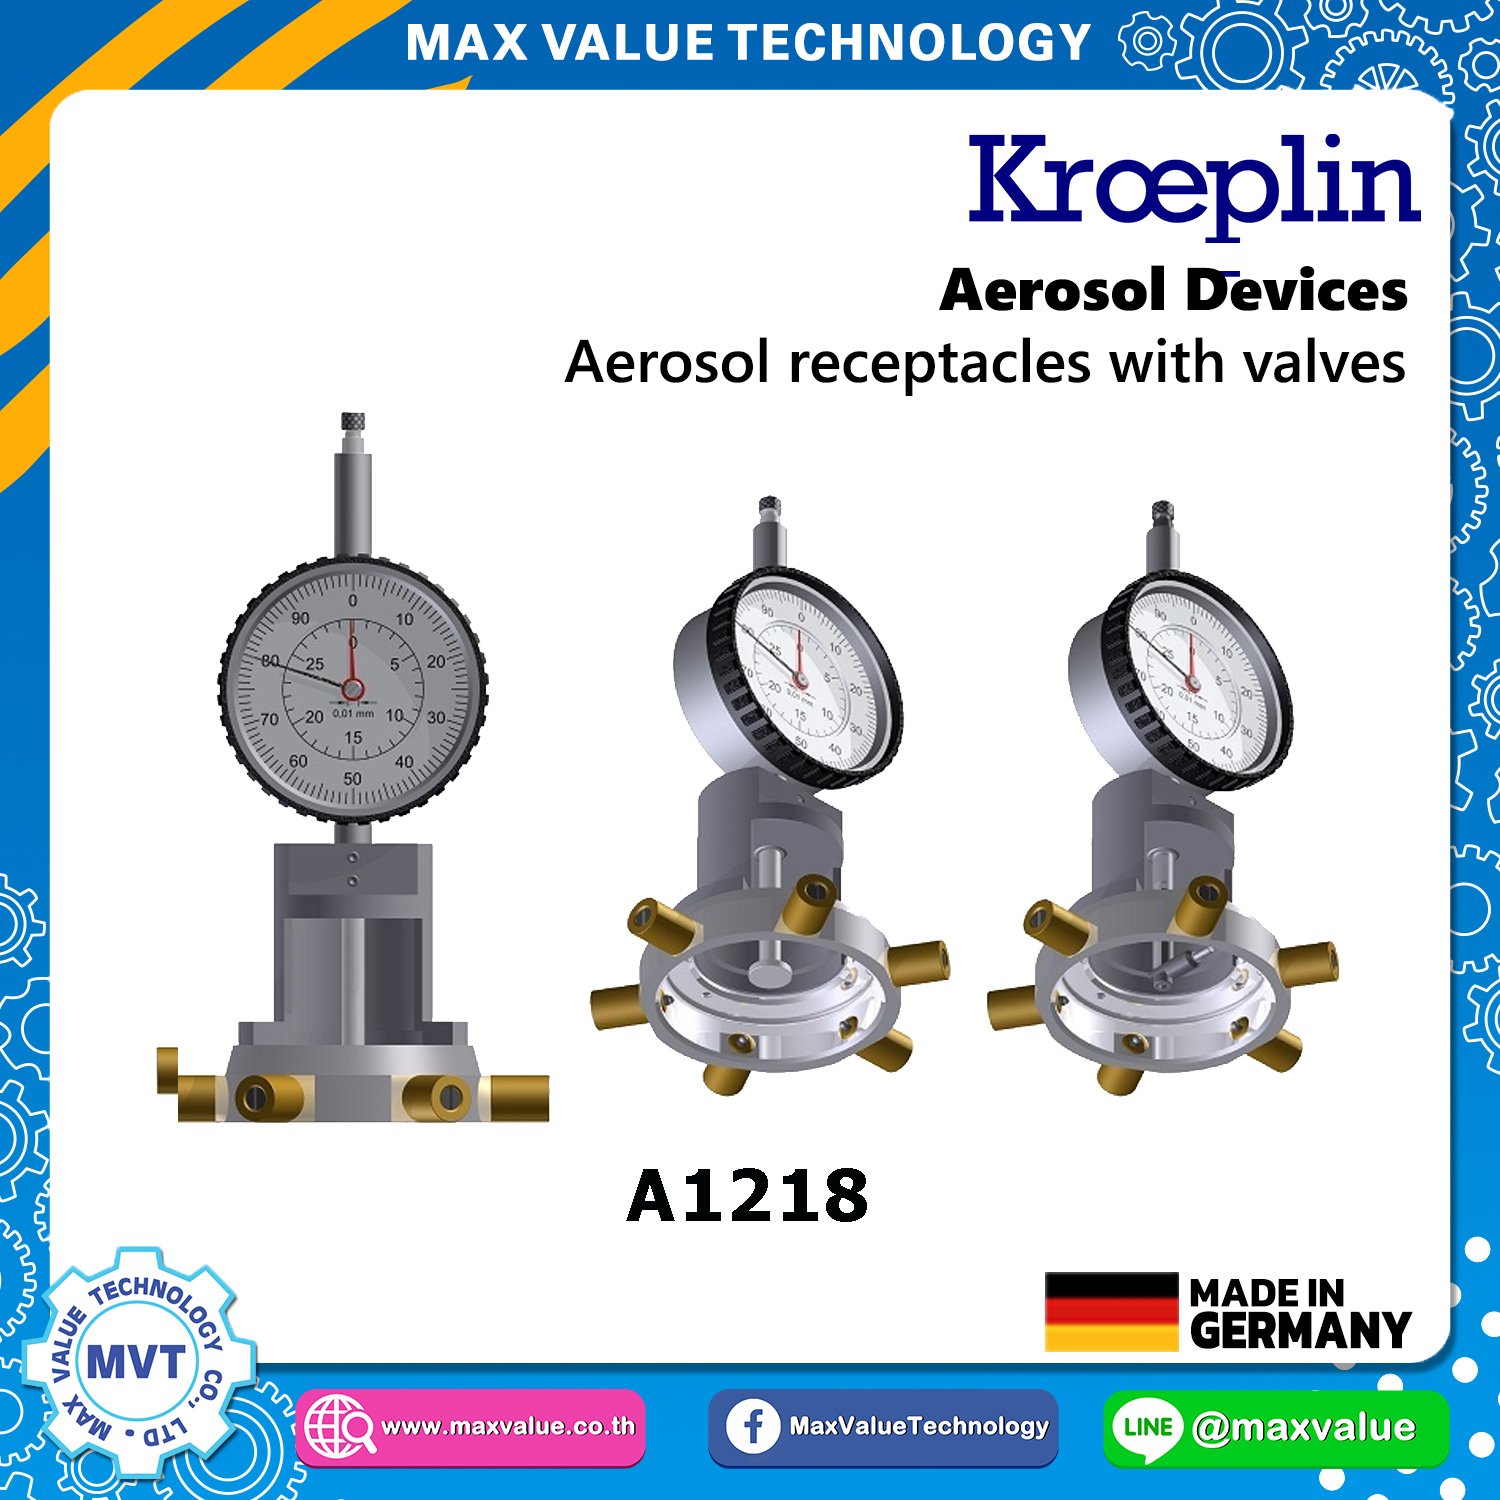 A1218/AE1218 - Aerosol devices - Aerosol receptacles with valves